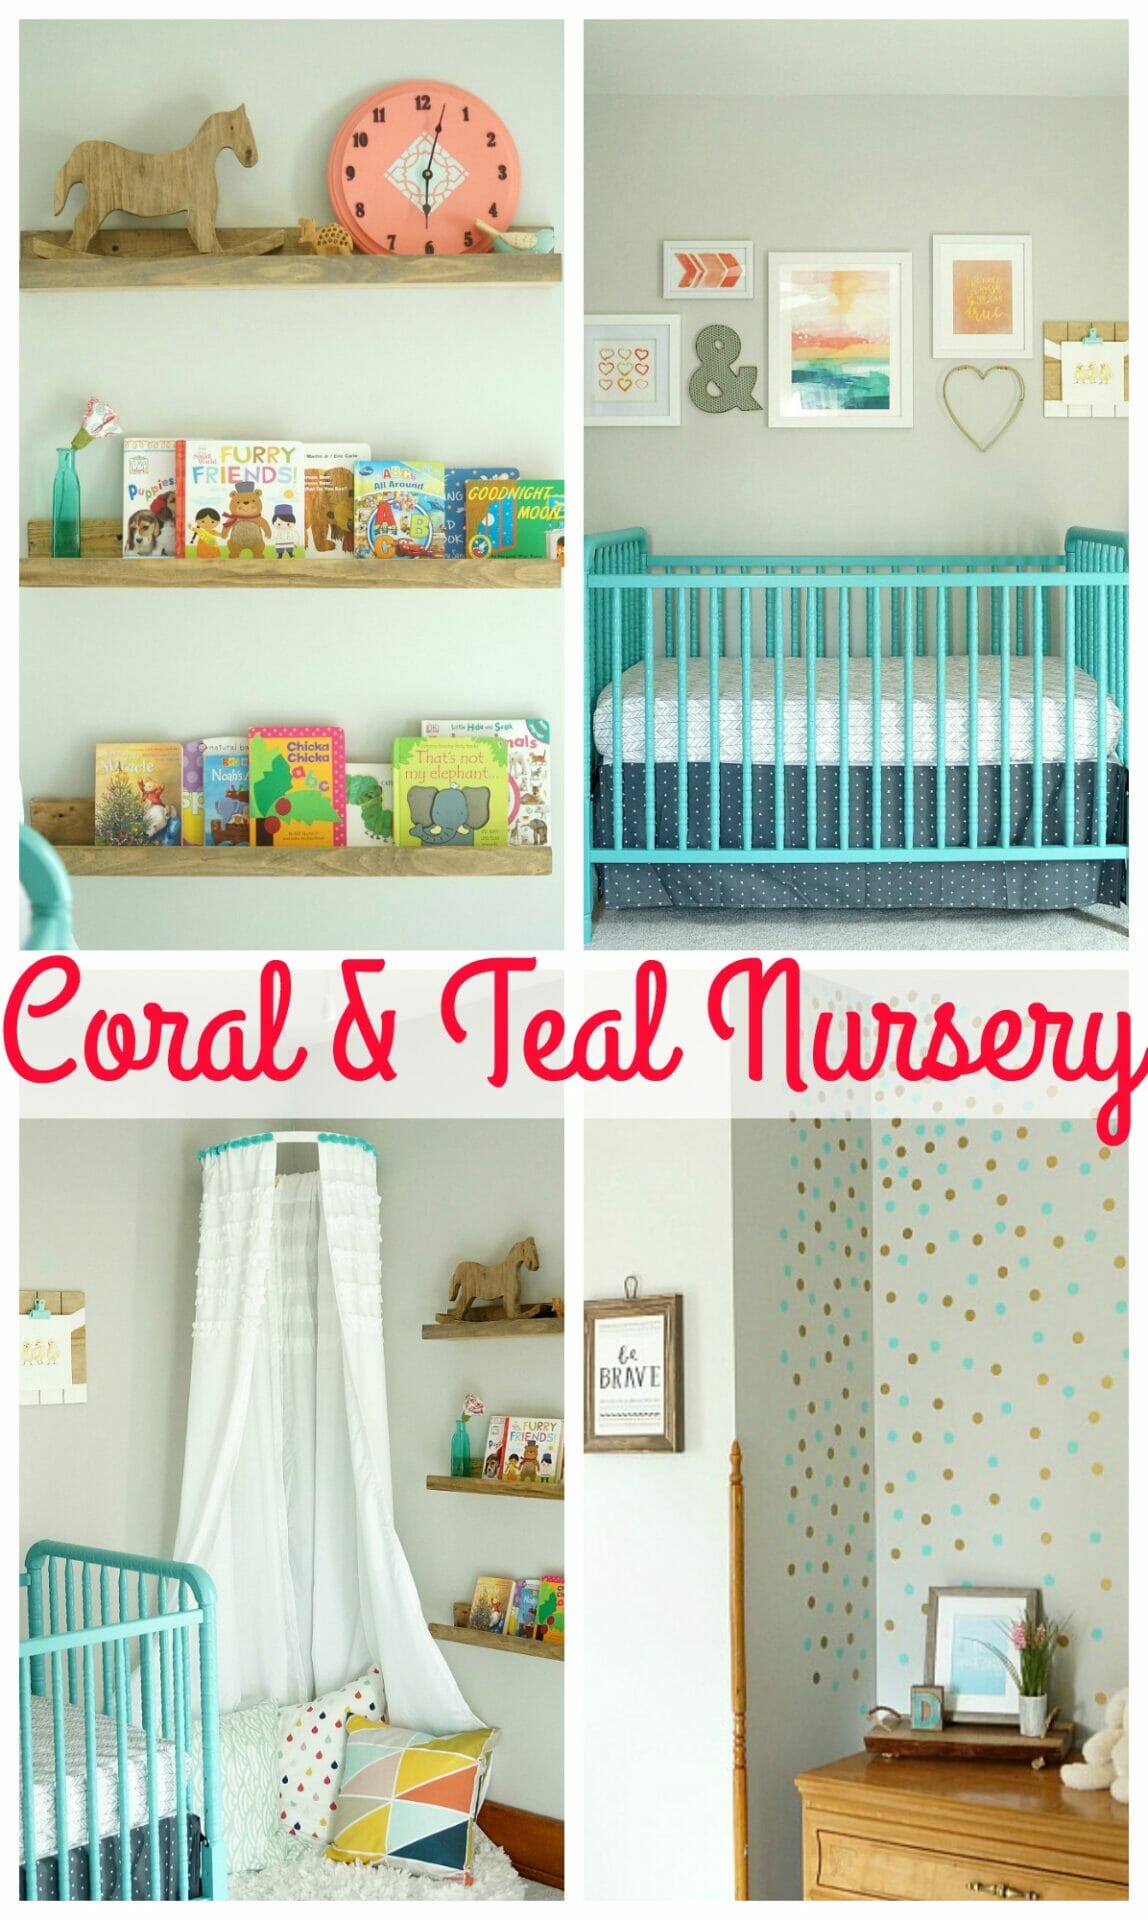 Bright and Colorful Coral and Teal Nursery with Polka Dot Wall, Gallery Wall, DIY Canopy, and Book Display